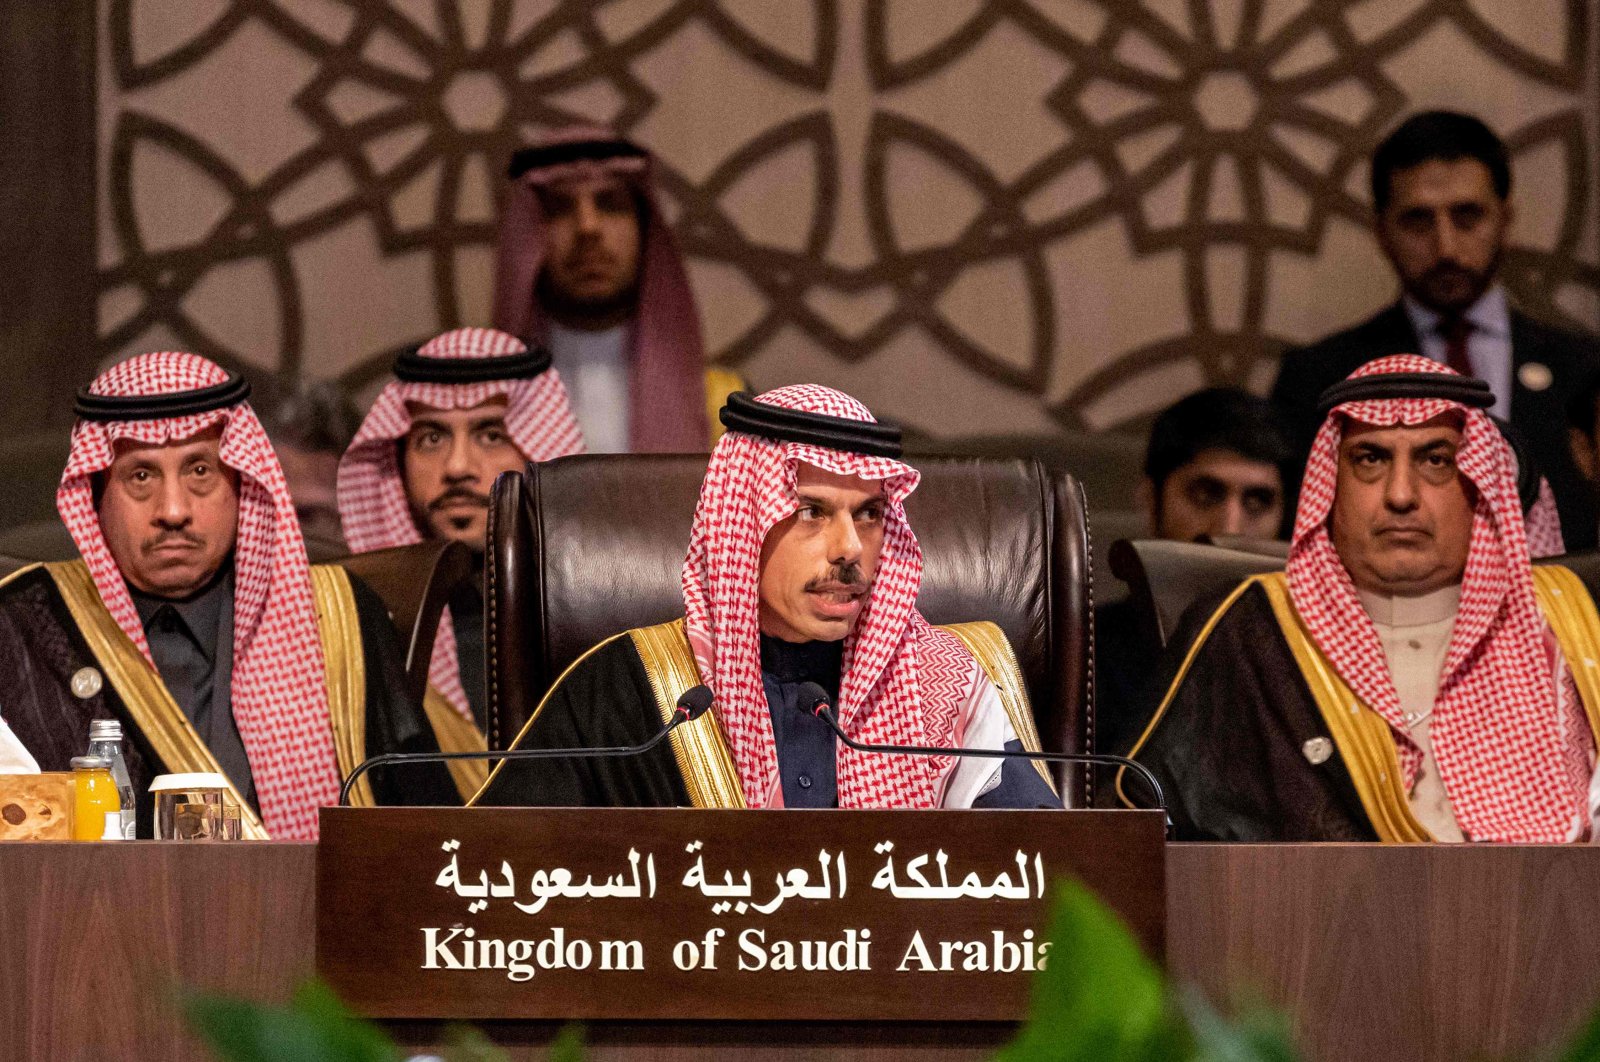 Saudi Arabia&#039;s Foreign Minister Prince Faisal bin Farhan al-Saud (C) speaks at the &quot;Baghdad Conference for Cooperation and Partnership&quot; in Sweimeh, Jordan, Dec. 20, 2022. (AFP Photo)